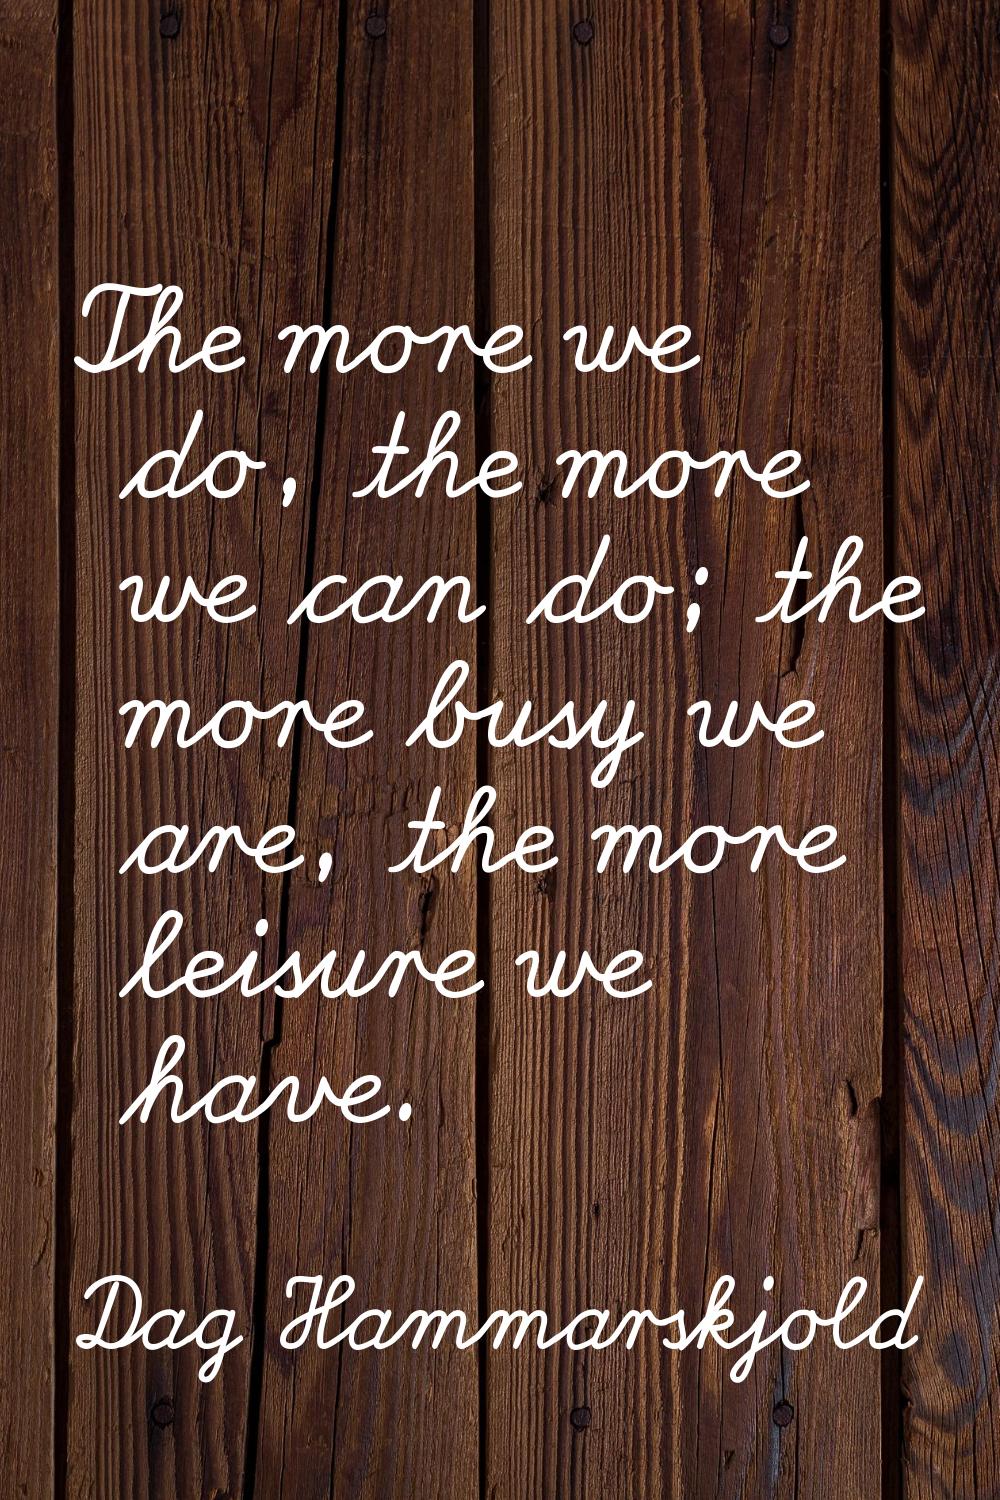 The more we do, the more we can do; the more busy we are, the more leisure we have.